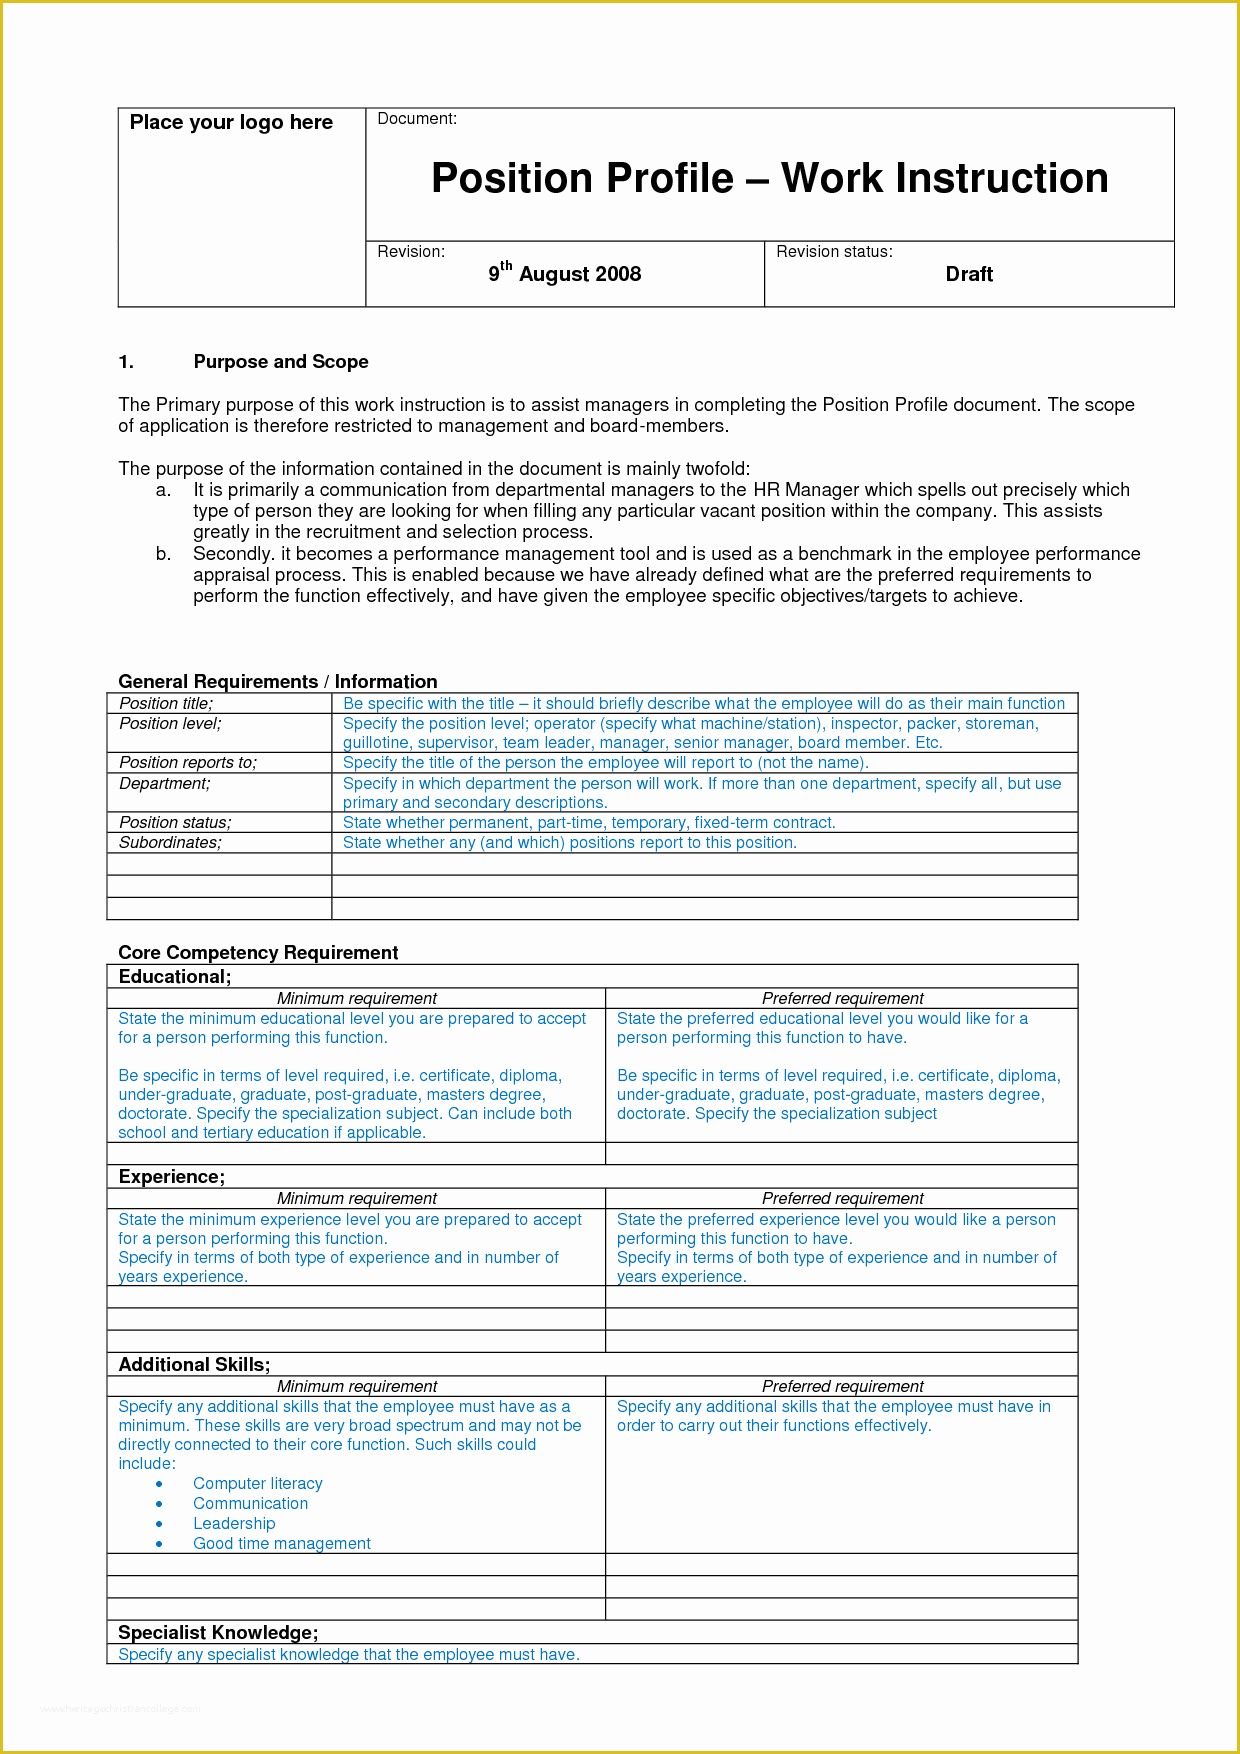 Free Work Instruction Template Downloads Of Free Work Instruction Template Downloads Fine Work